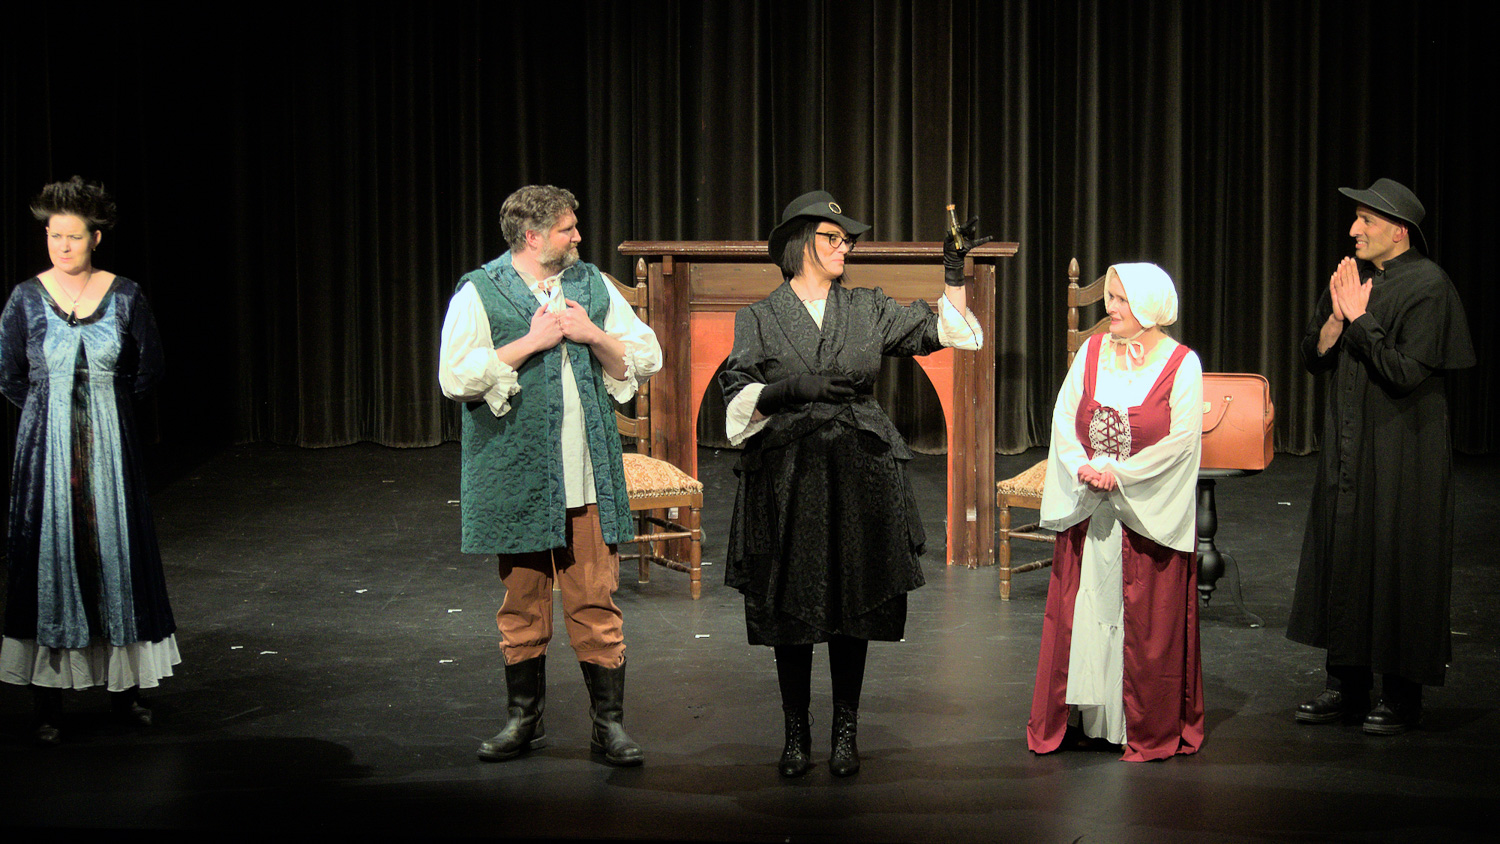 Five actors dressed in medieval costumes on a theatre stage. The character in the middle, dressed in black, is holding something up for the others to look at